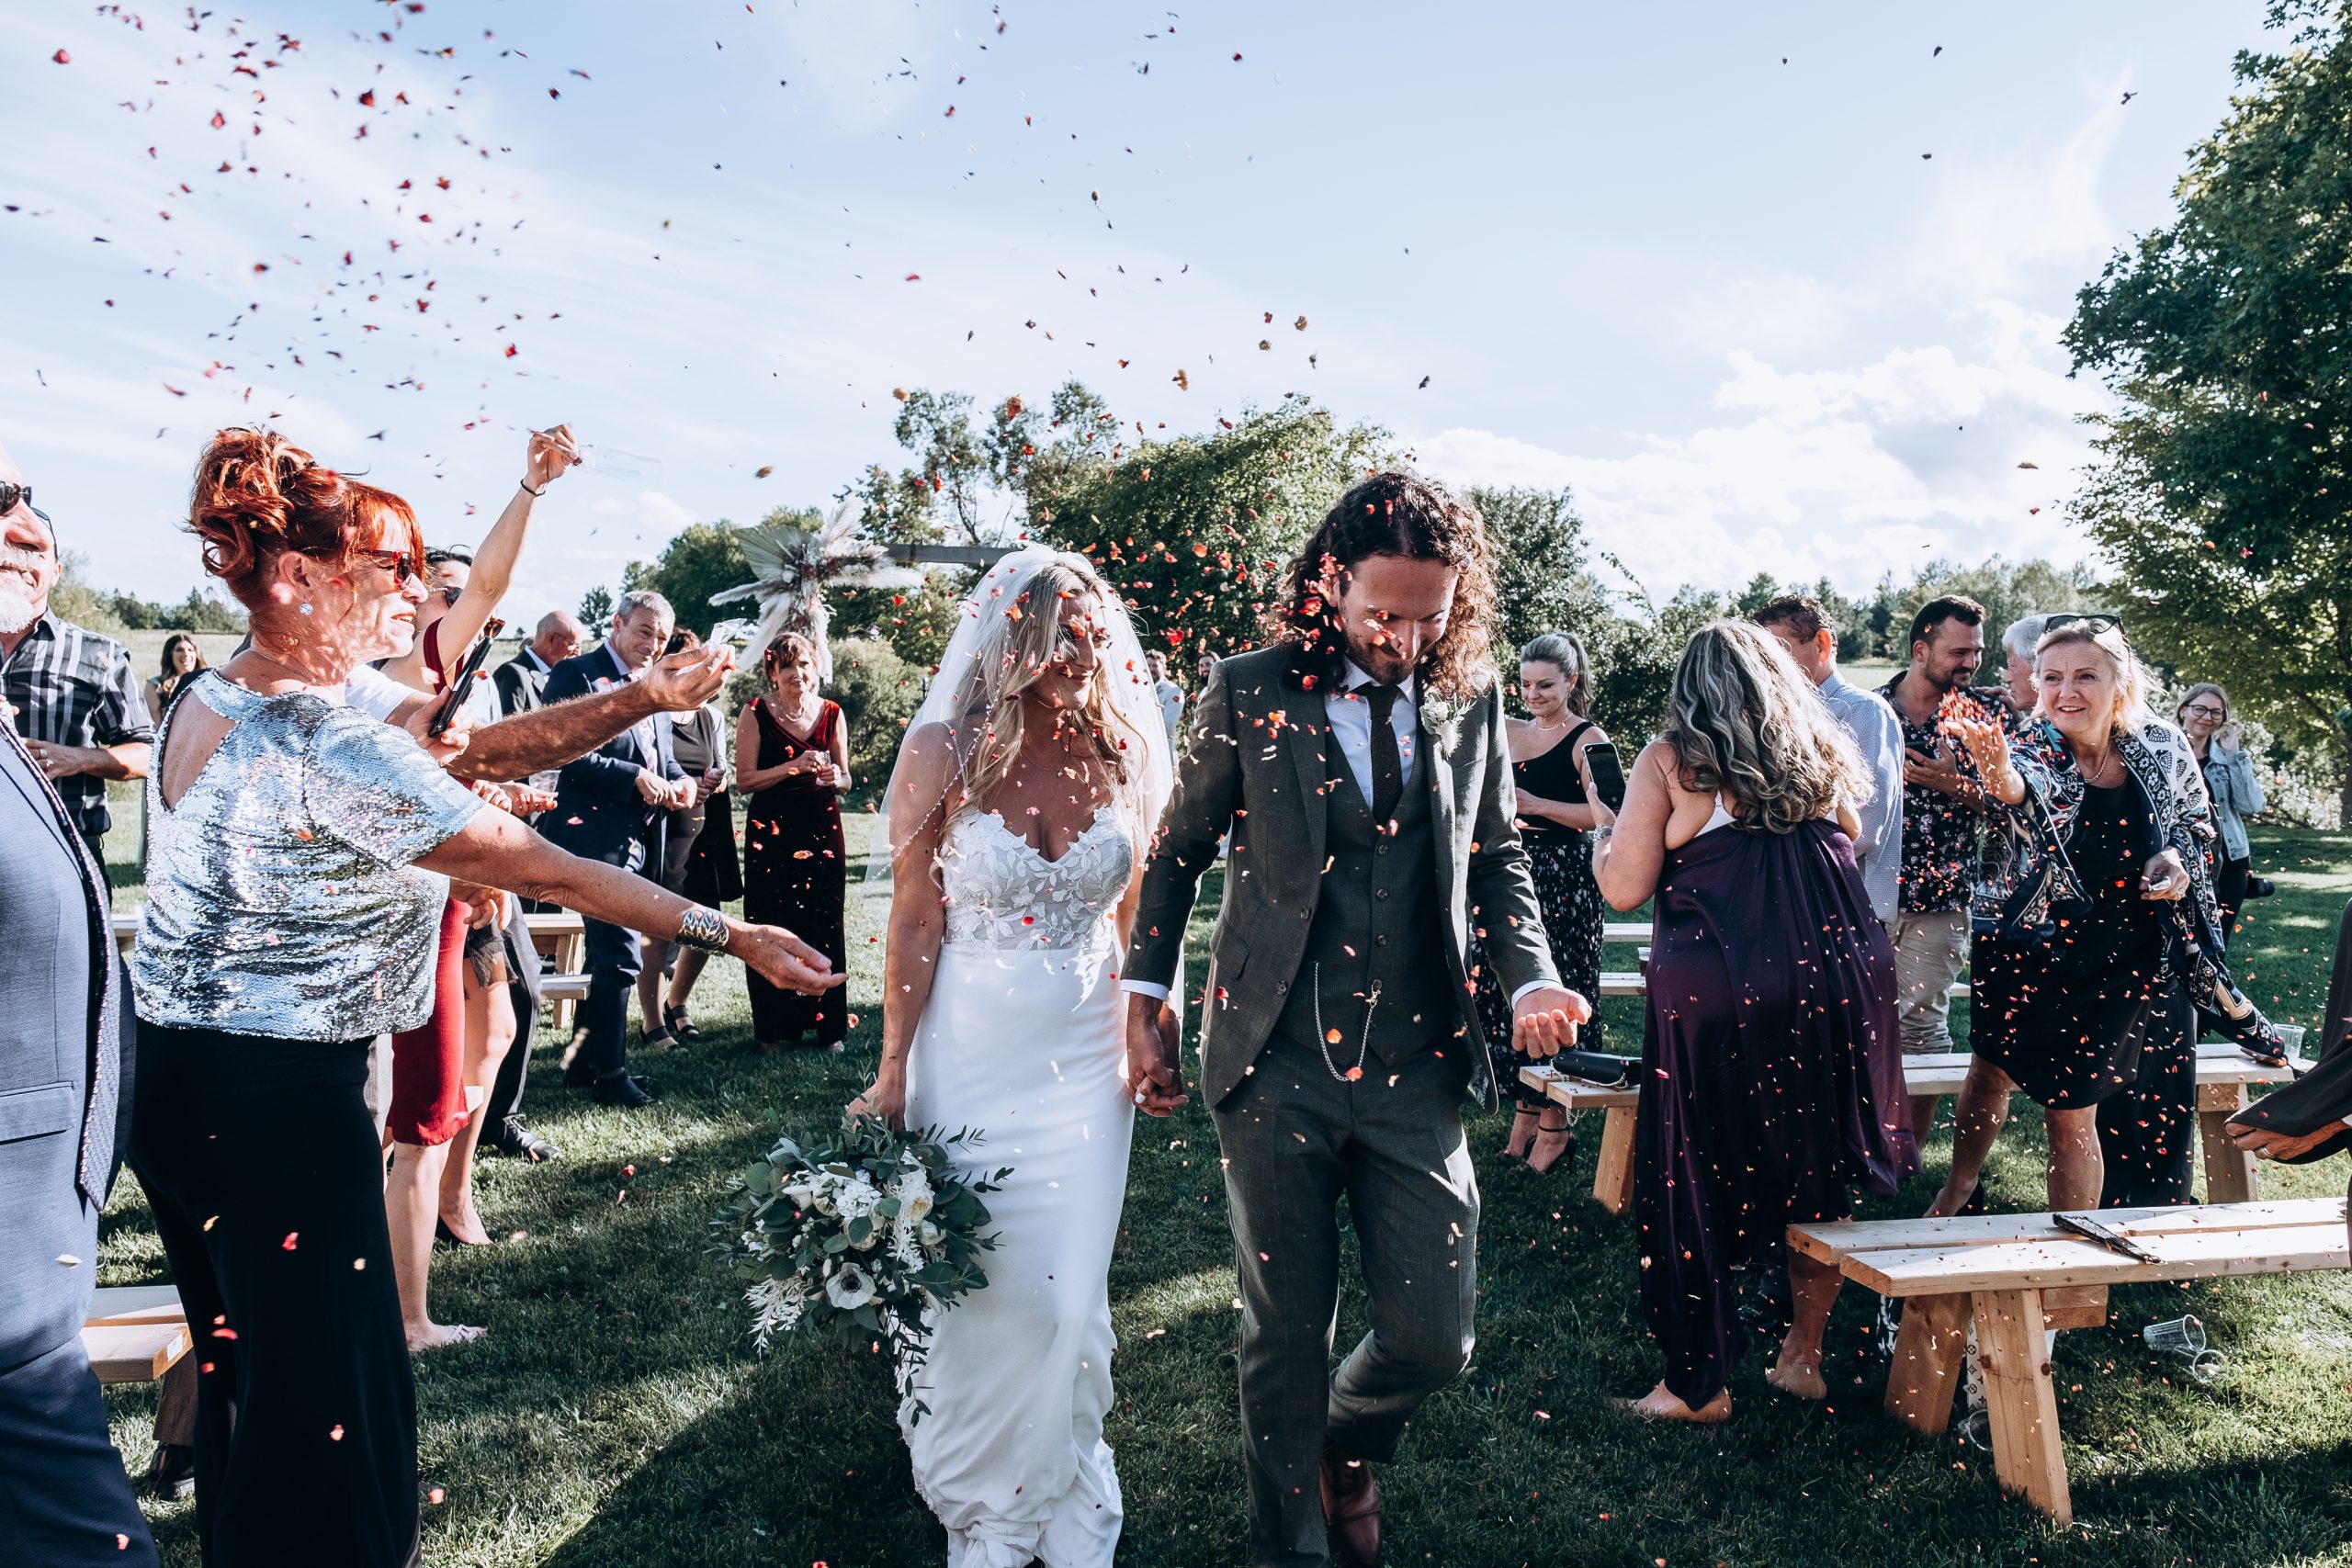 bride and groom hold hands as guests throw confetti after the ceremony